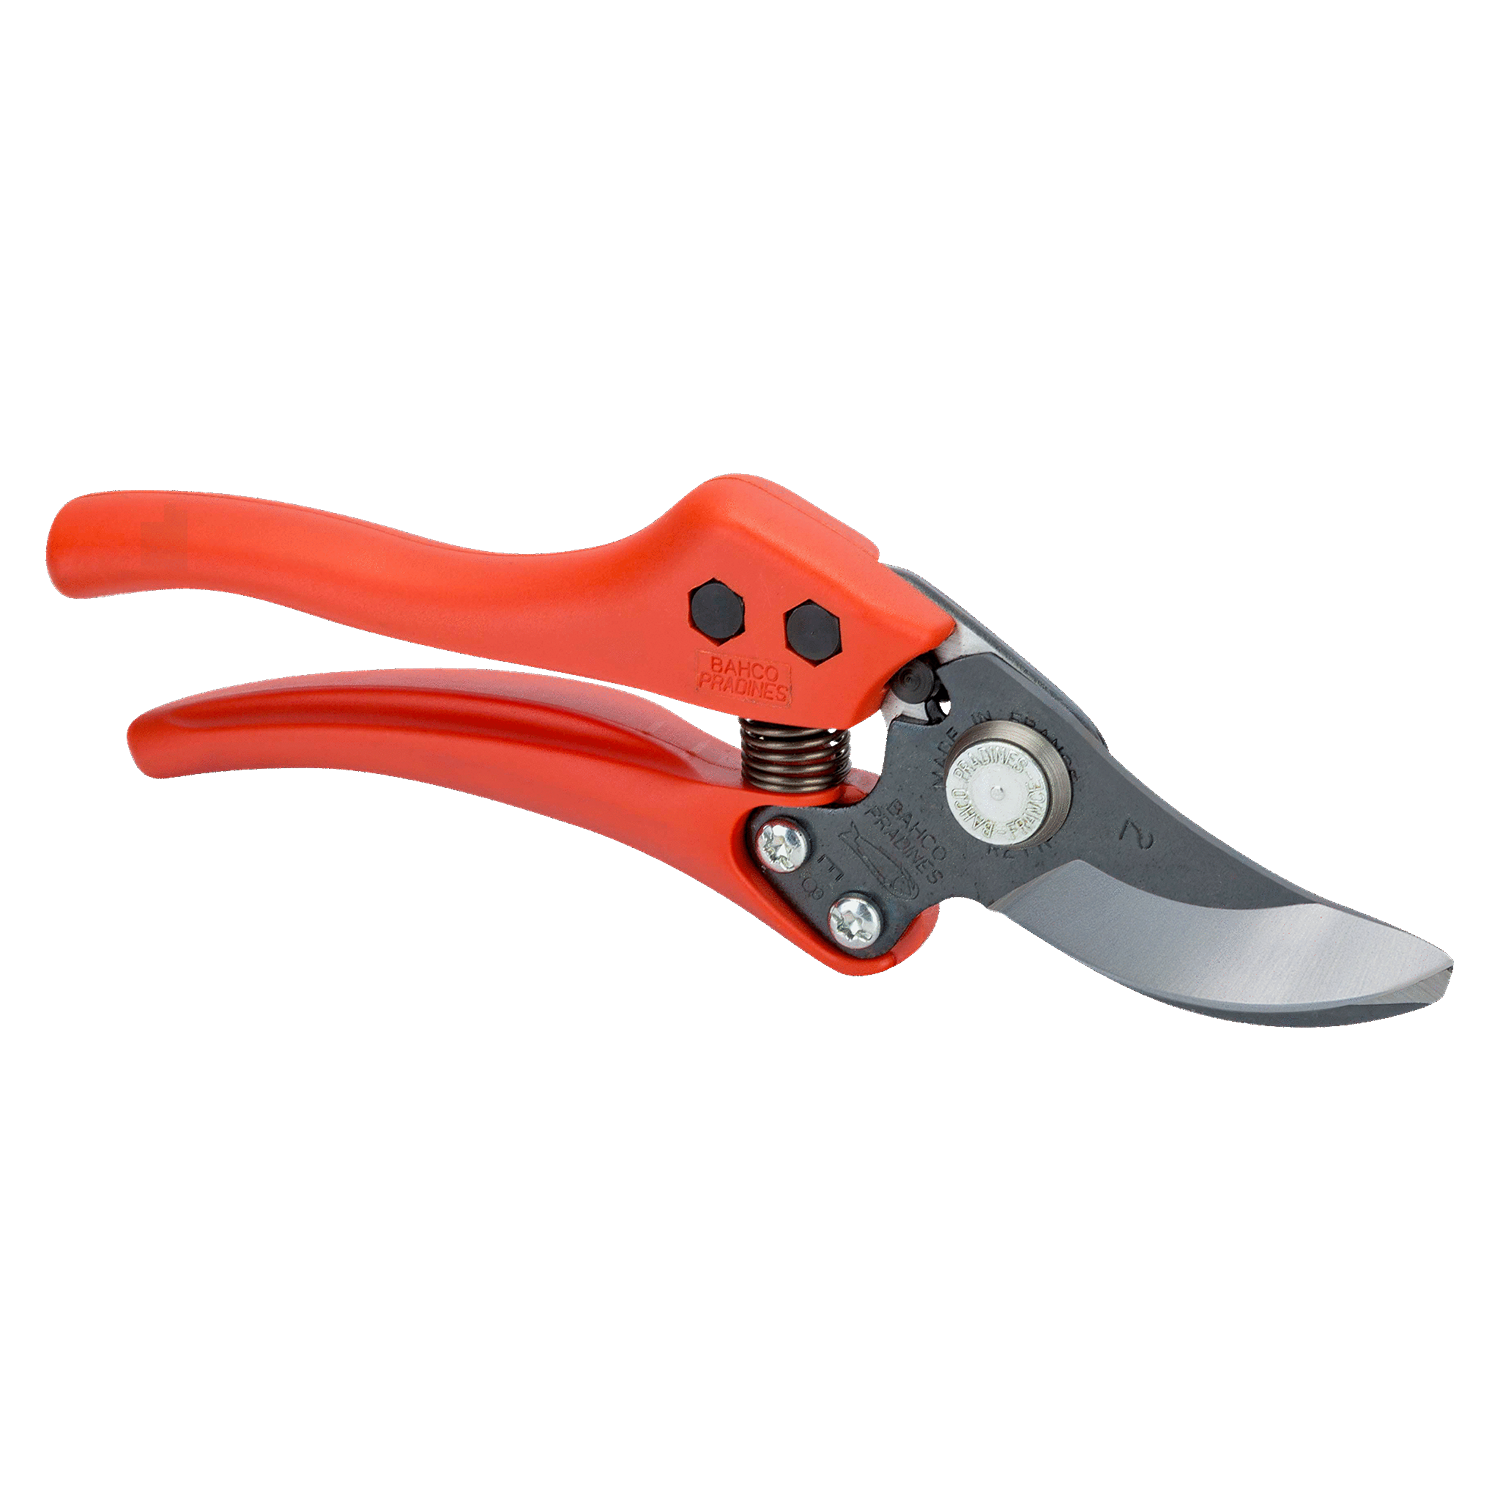 BAHCO P1-20/ P1-23 Bypass Secateurs with Composite Handle - Premium Secateurs from BAHCO - Shop now at Yew Aik.